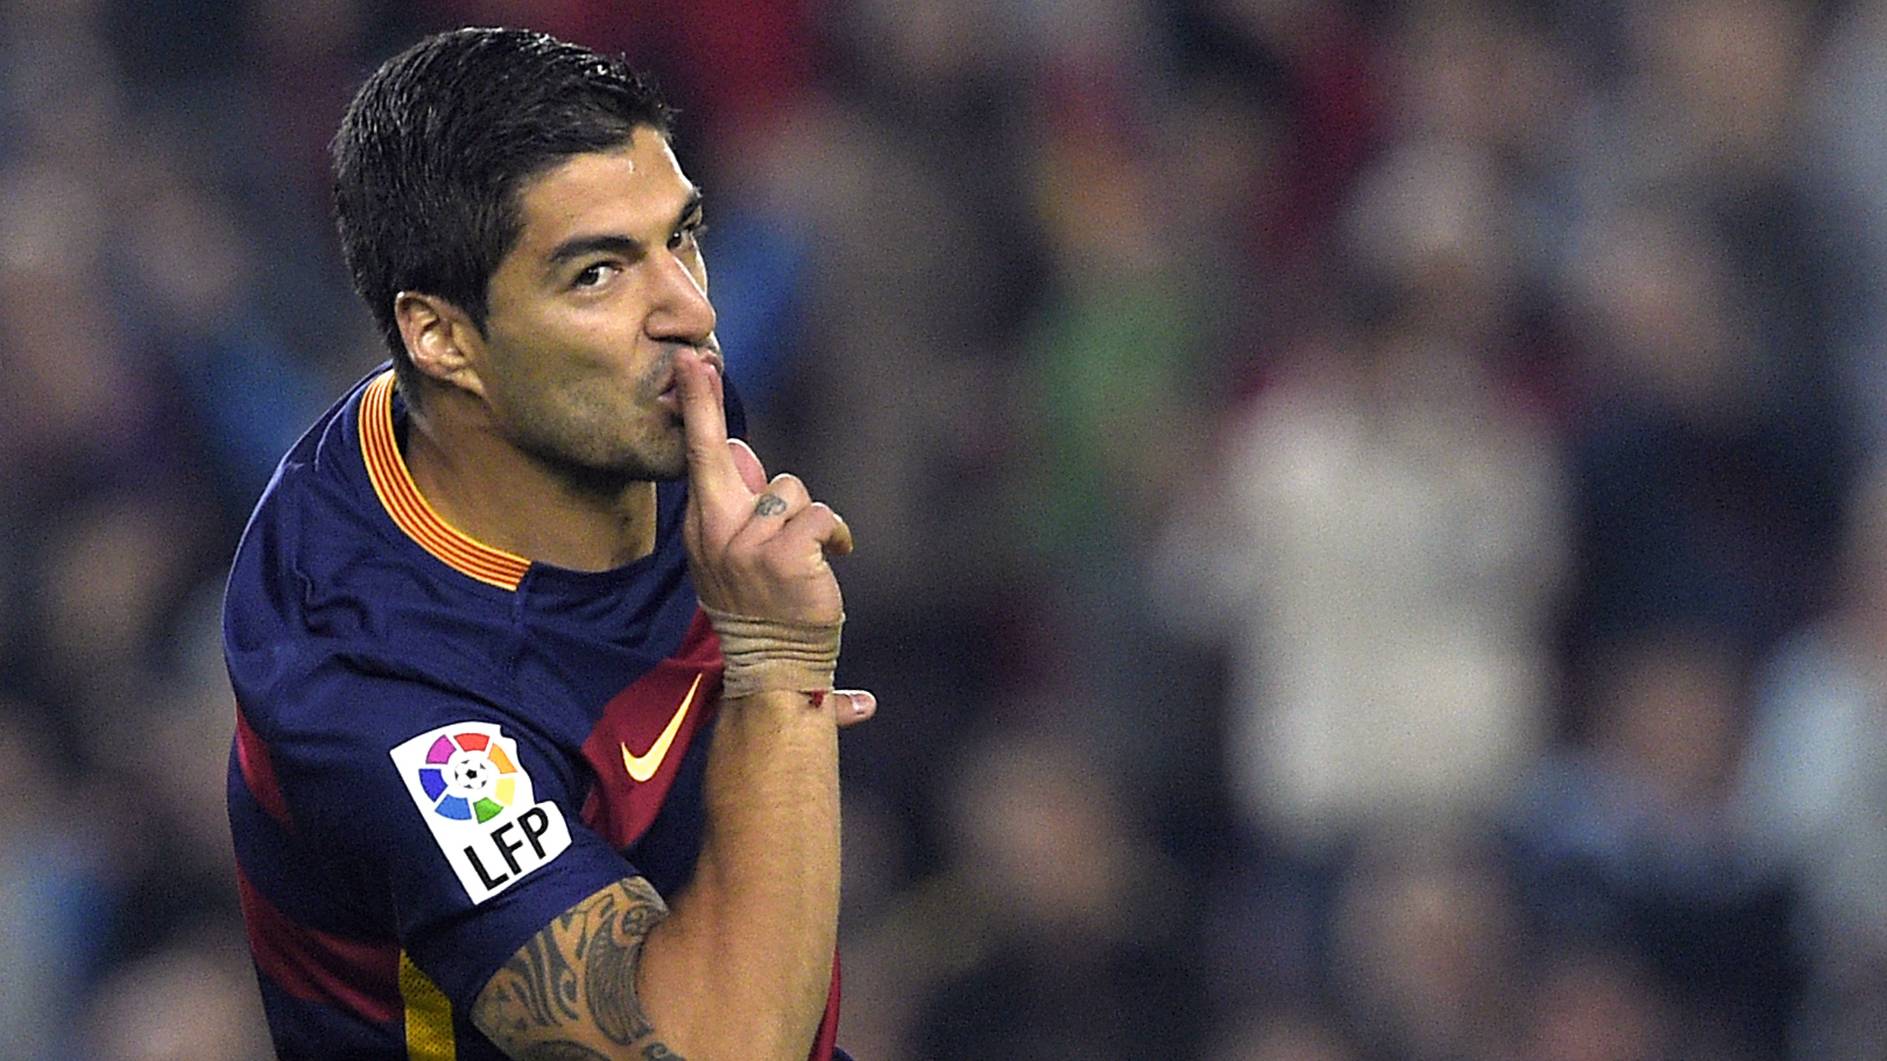 Luis Suárez has adapted  wonderfully to the attack of the FC Barcelona